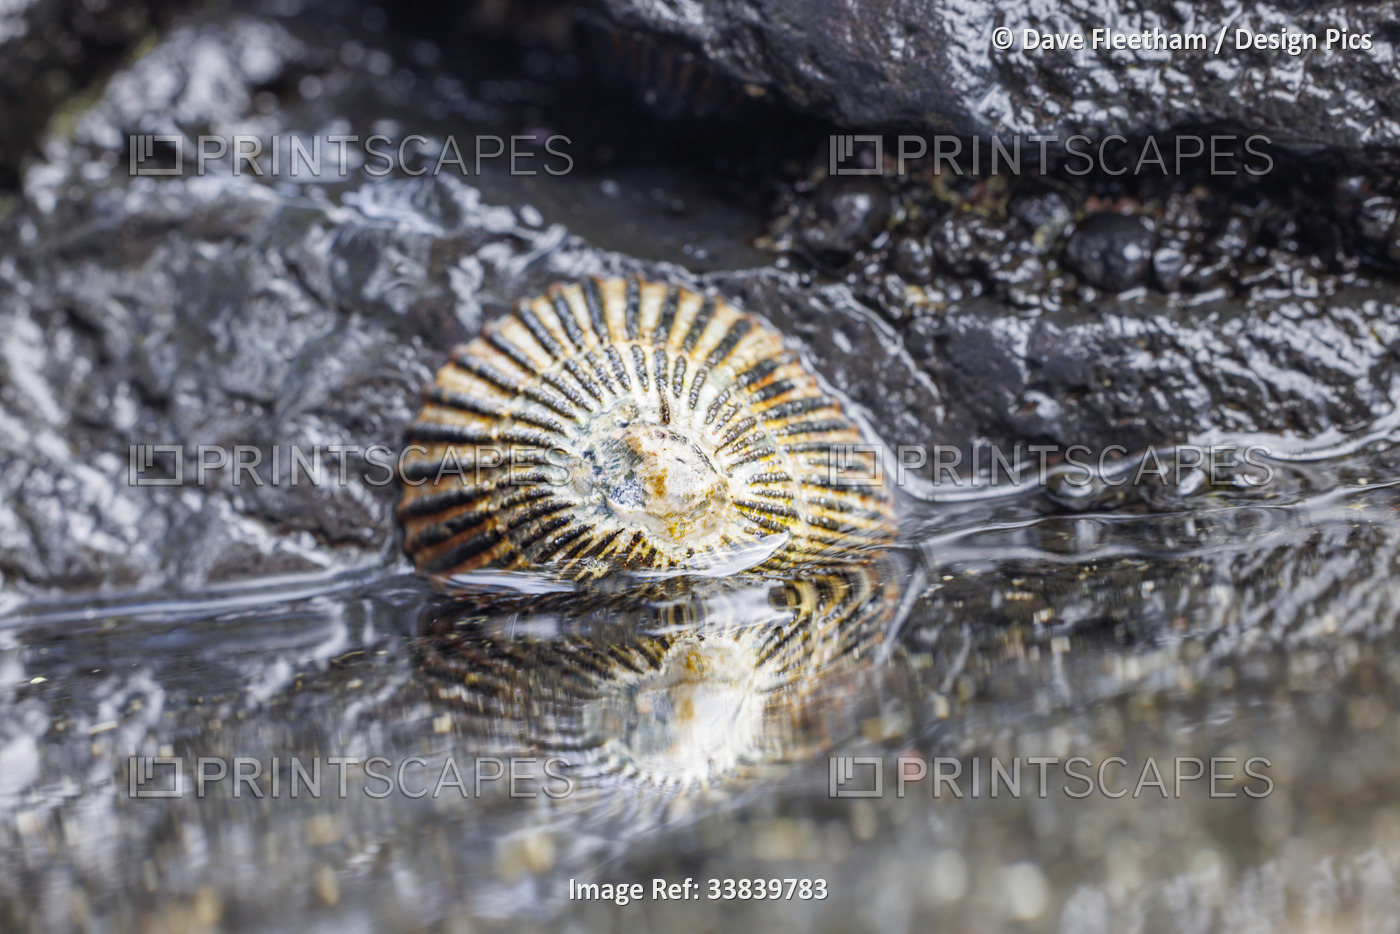 Opihi (Cellana sandwicensis) is an endemic type of limpet found in Hawai'i. It ...